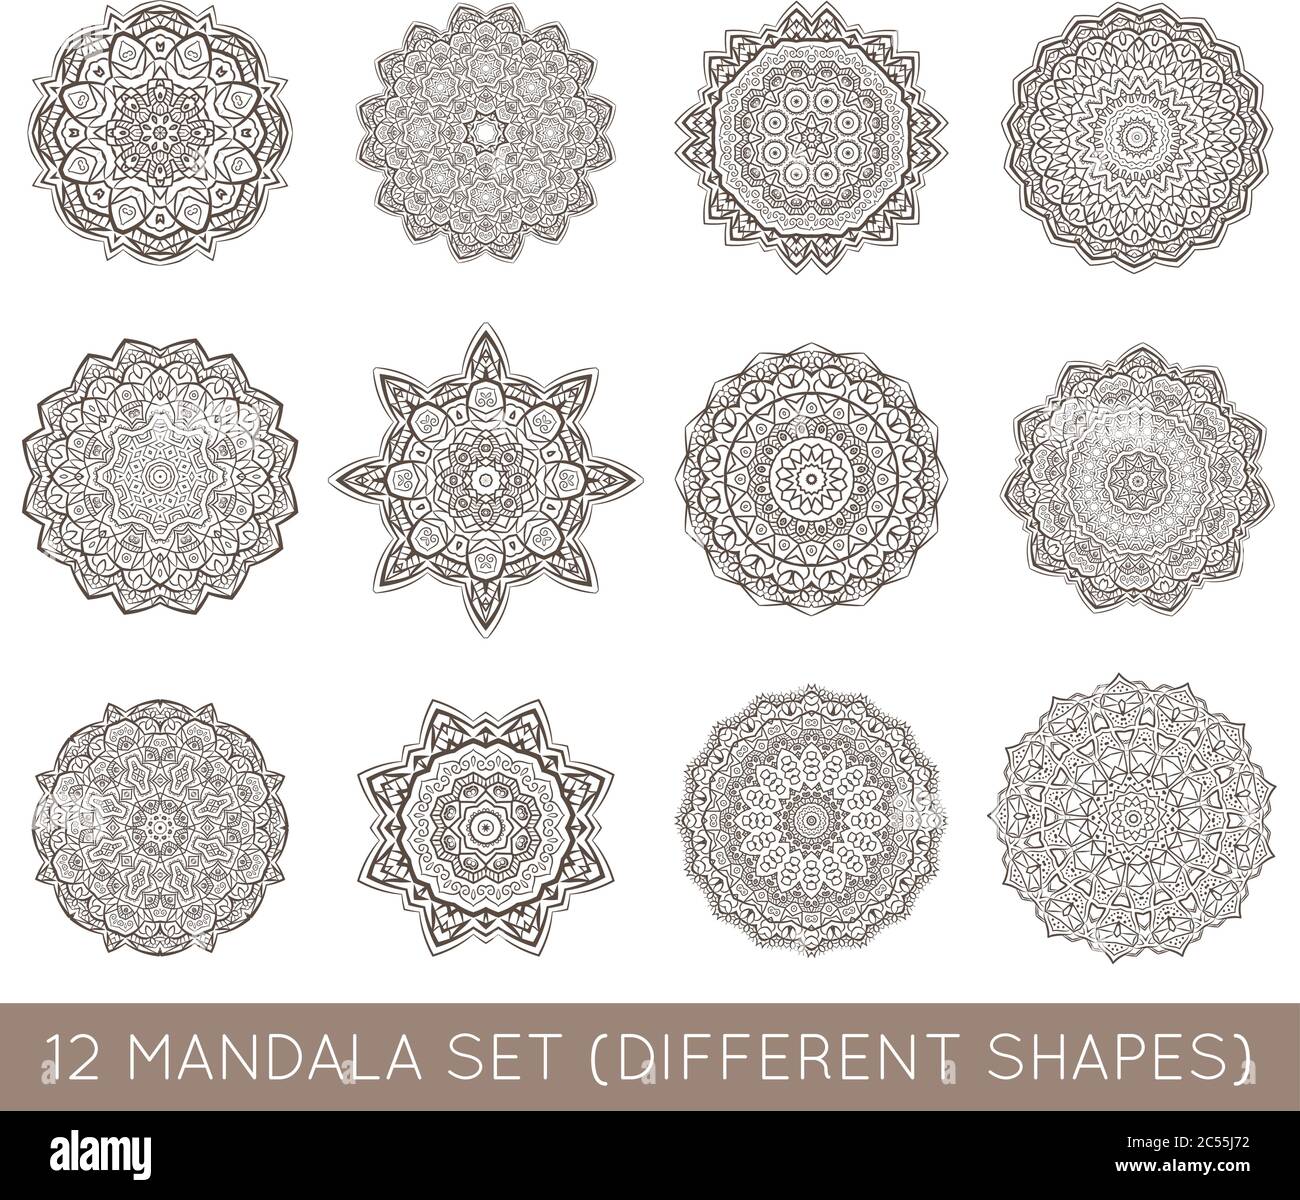 Aztec Tattoo Designs And European Embroidery With  False Mandala Wall  Decal Namaste Indian Lotus Flower  Free Transparent PNG Clipart Images  Download